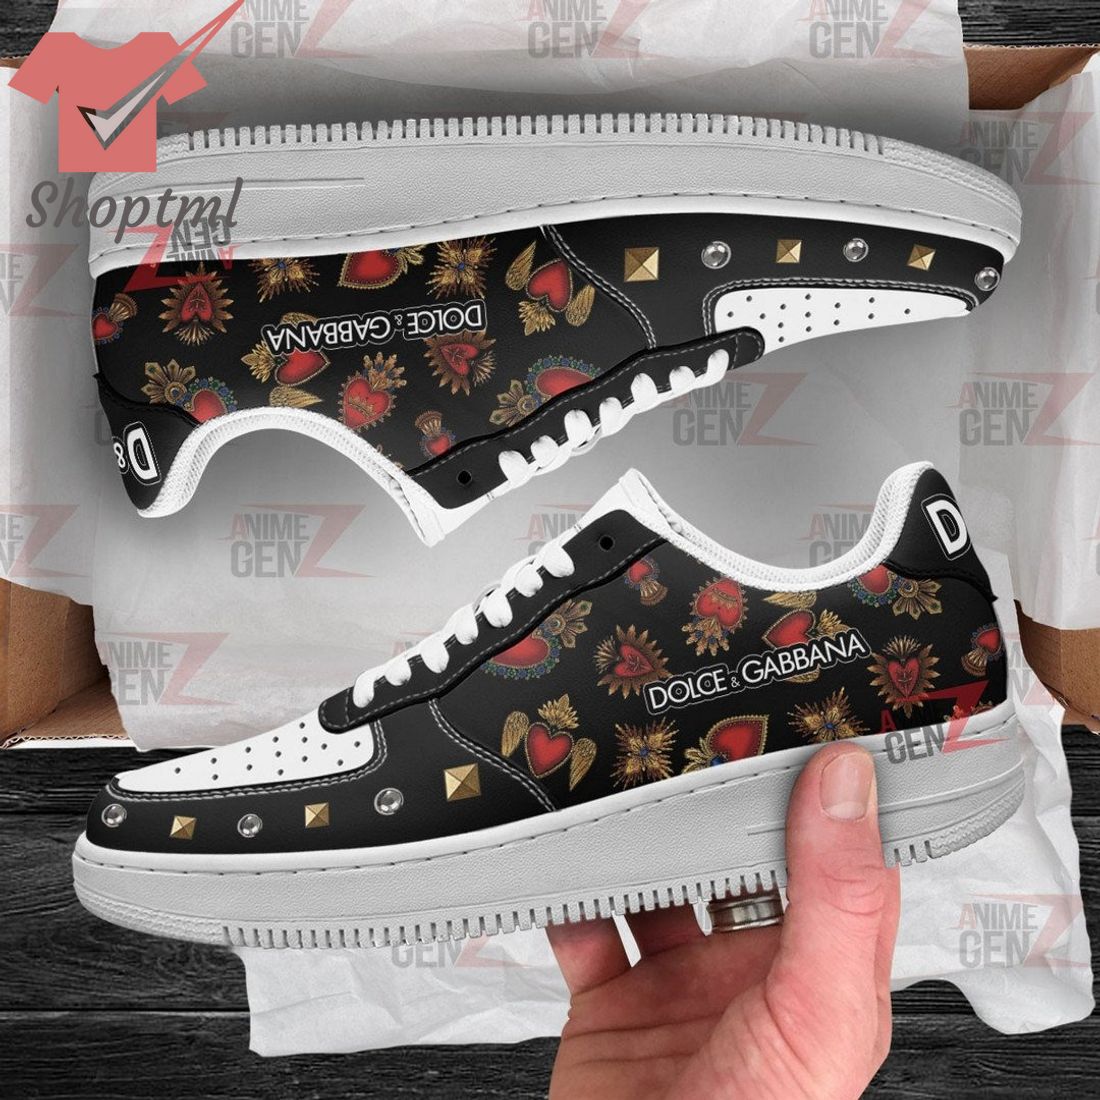 Dolce & Gabbana Luxury Brand Air Force 1 Sneakers